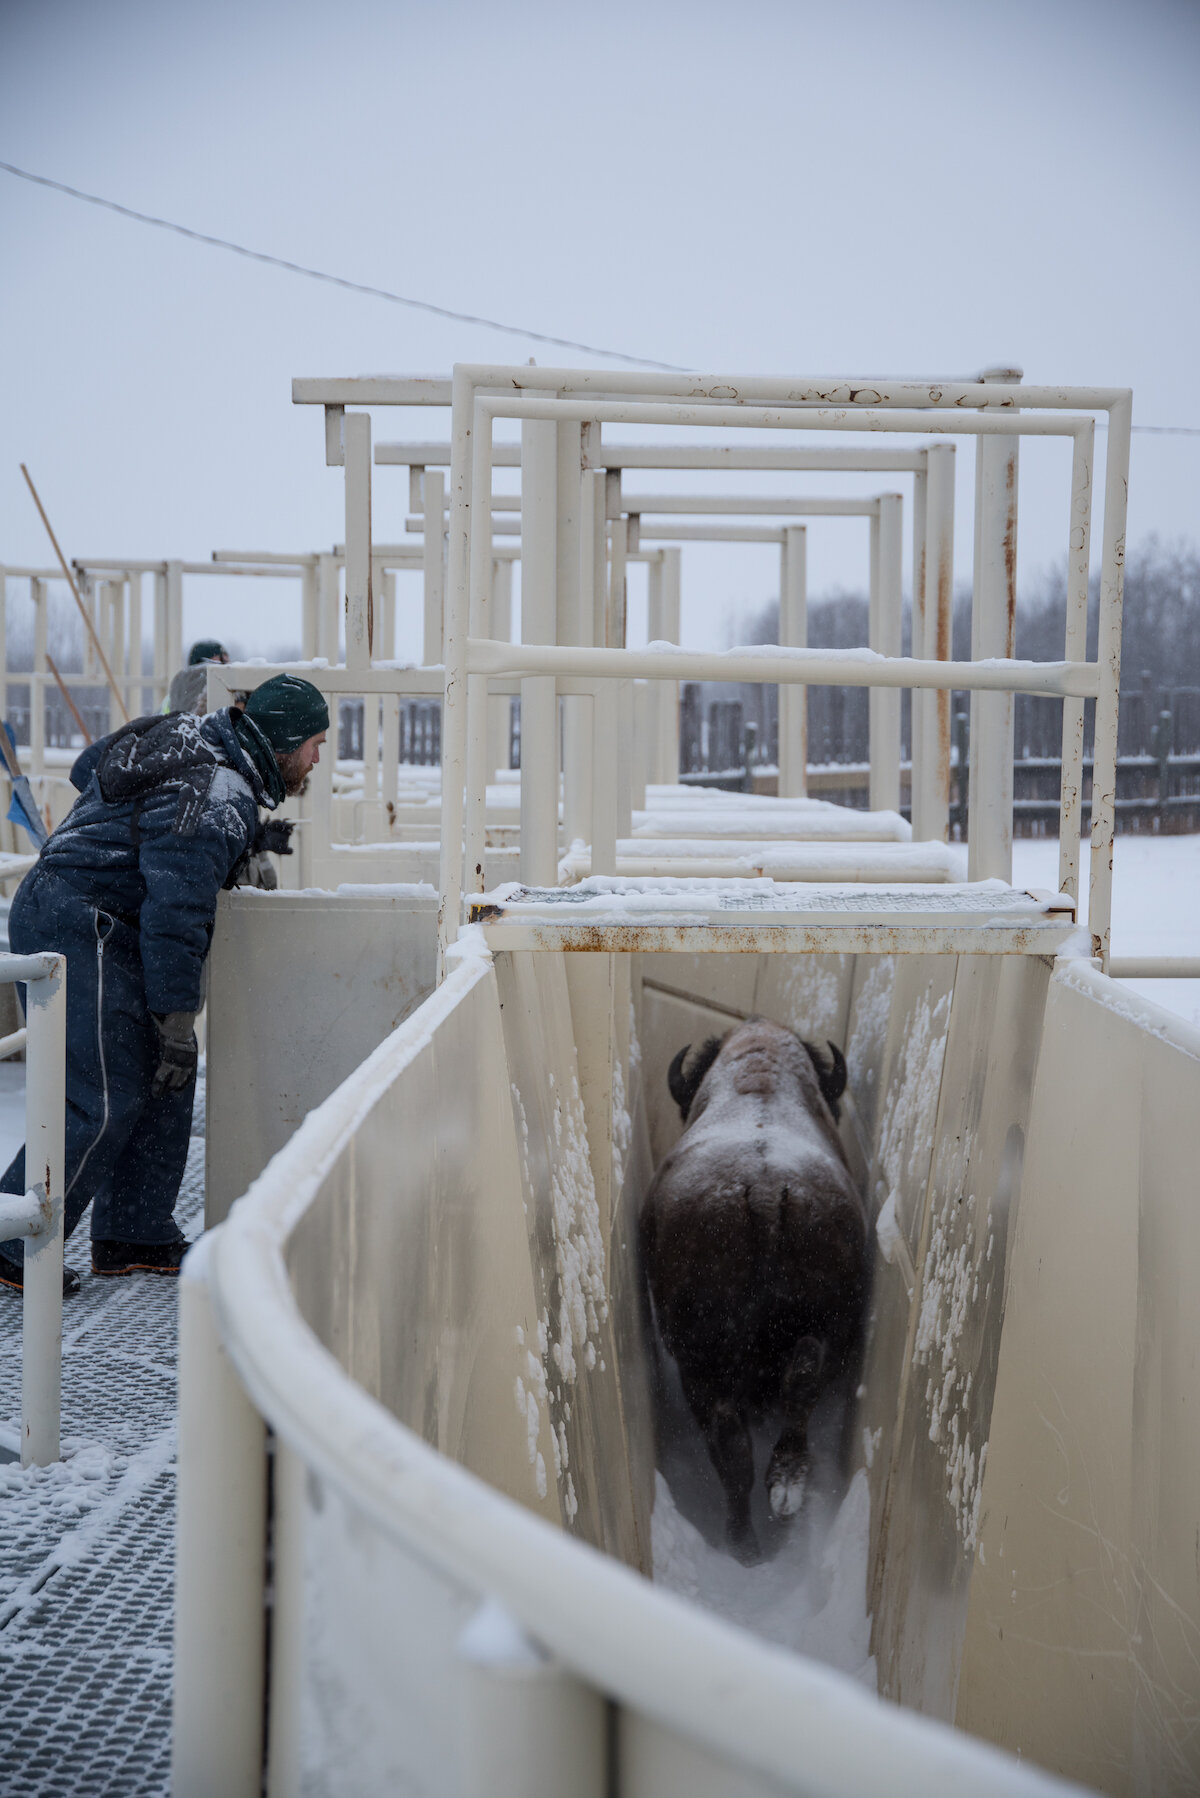  A Parks Canada team member watches as a bison moves through Elk Island National Park’s bison handling facility. Elk Island’s bison handling facility is designed to reduce stress on the bison when they are rounded up and moved. Photo by Cameron Johns